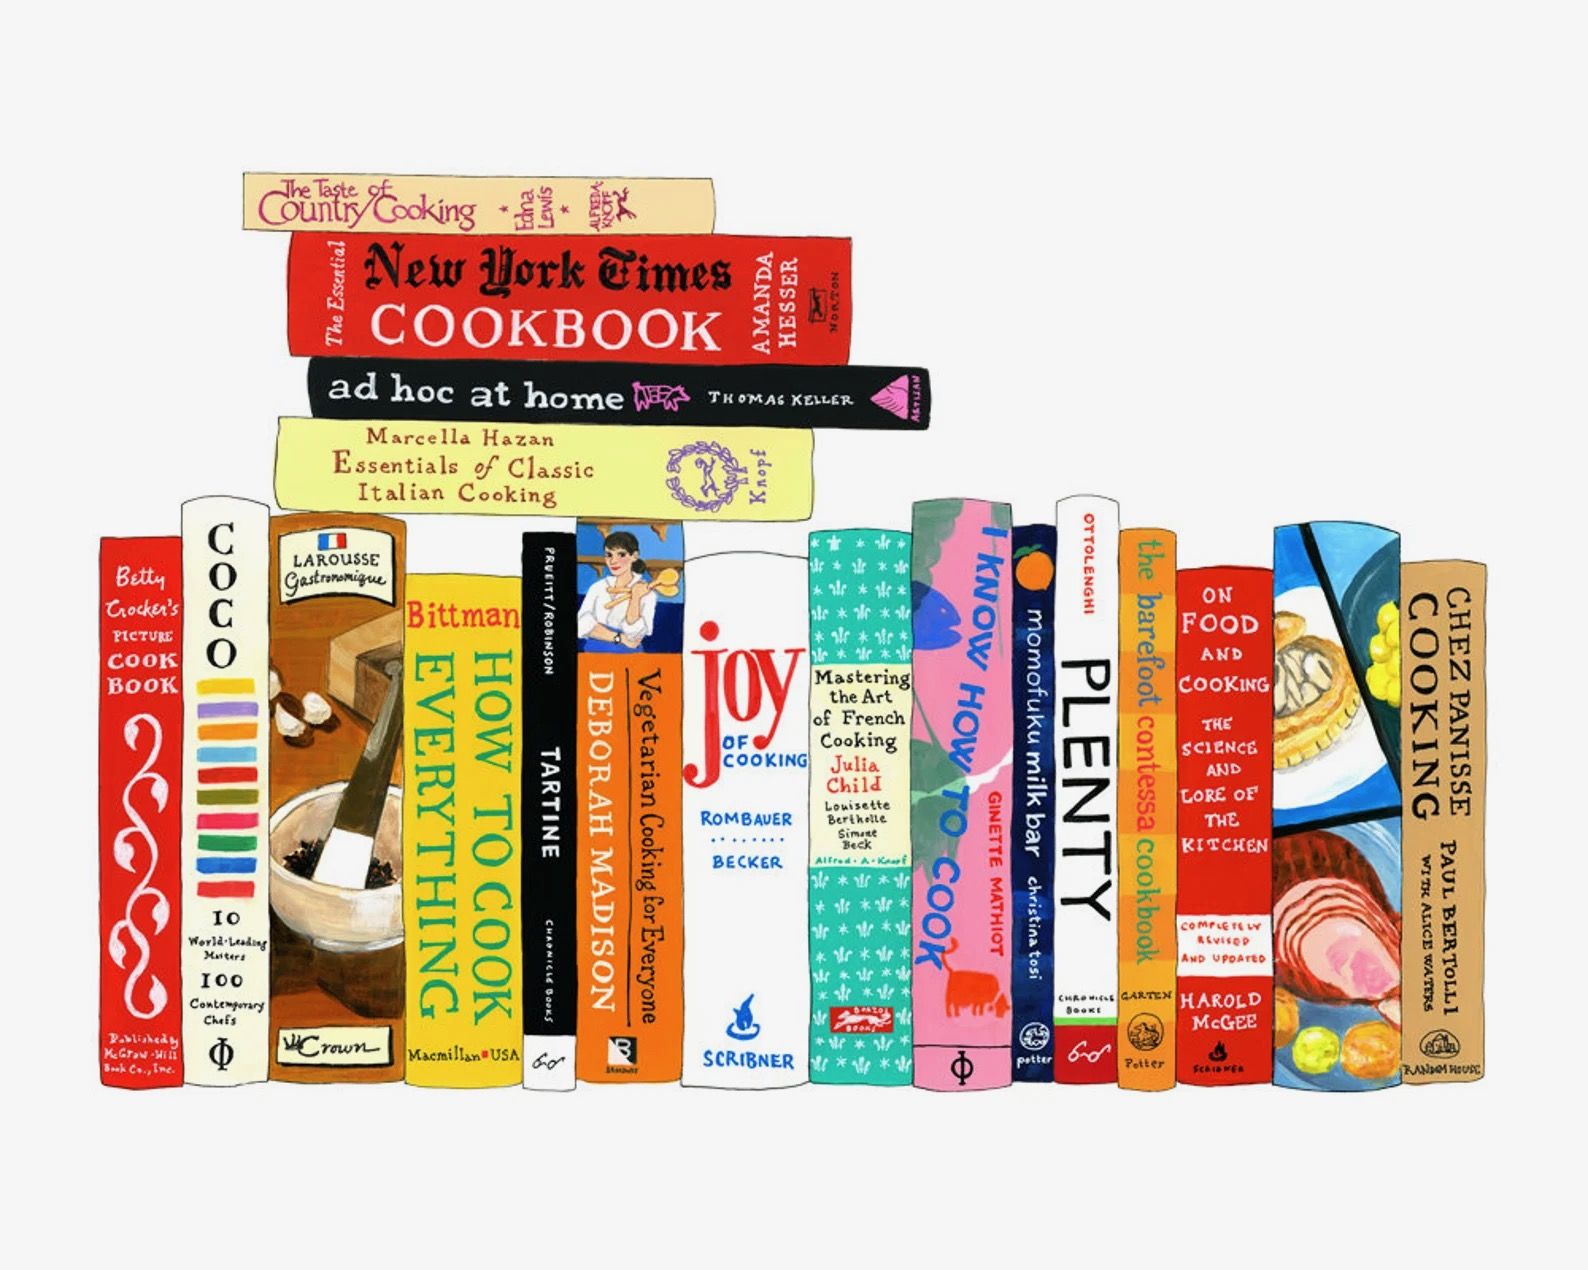 A illustrated print of a shelf of colorful cookbooks, spines out, drawn to look exactly like the spines of the actual cookbooks.